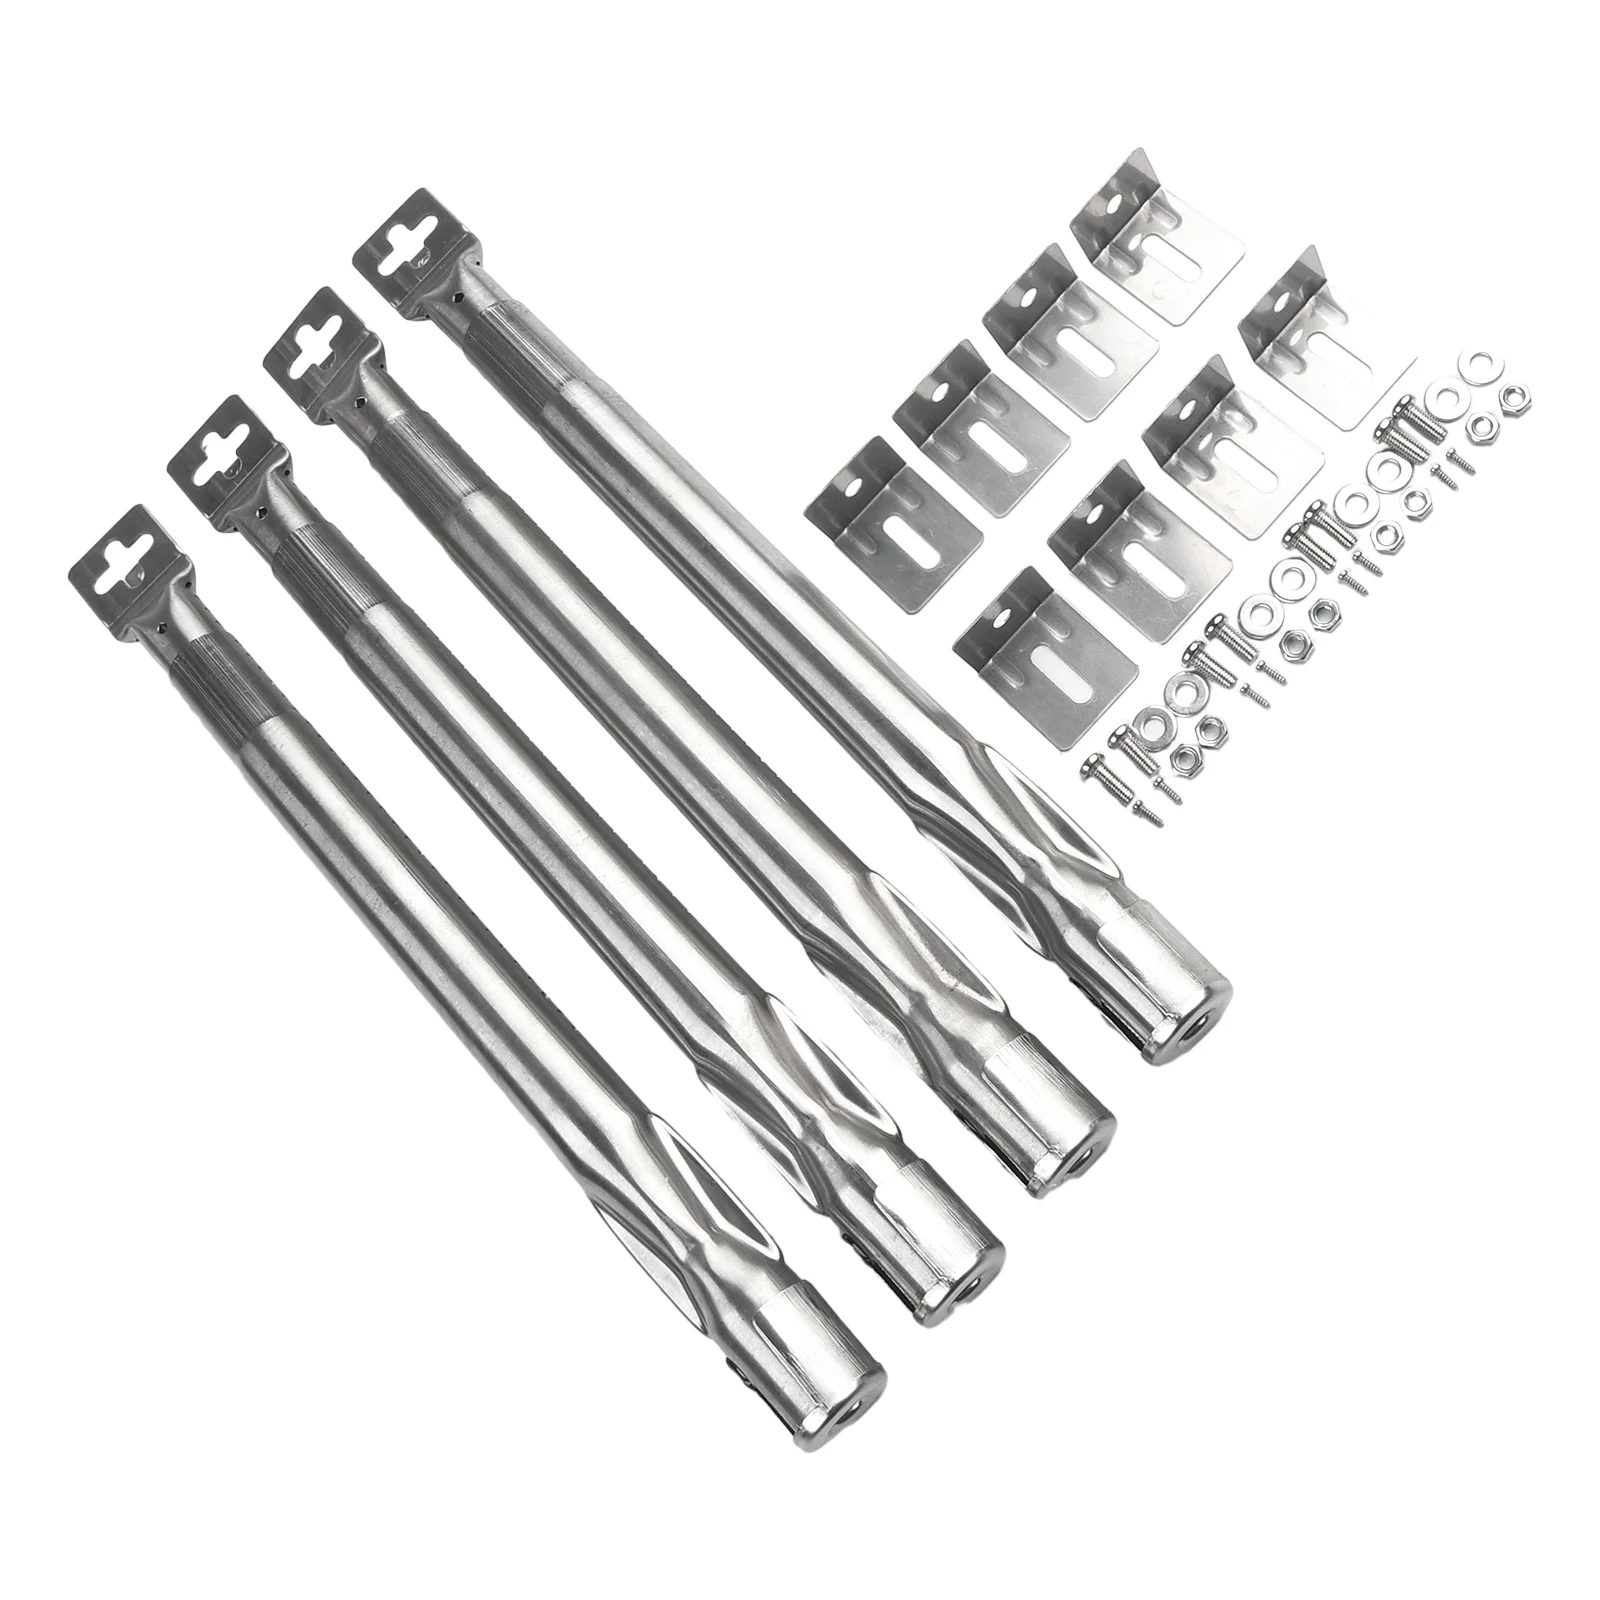 

Adjustable Length Stainless Steel Burner Set for Gas Grill 4 Pcs Universal Fit Smooth Heat Distribution 11mm Hole Easy to Use